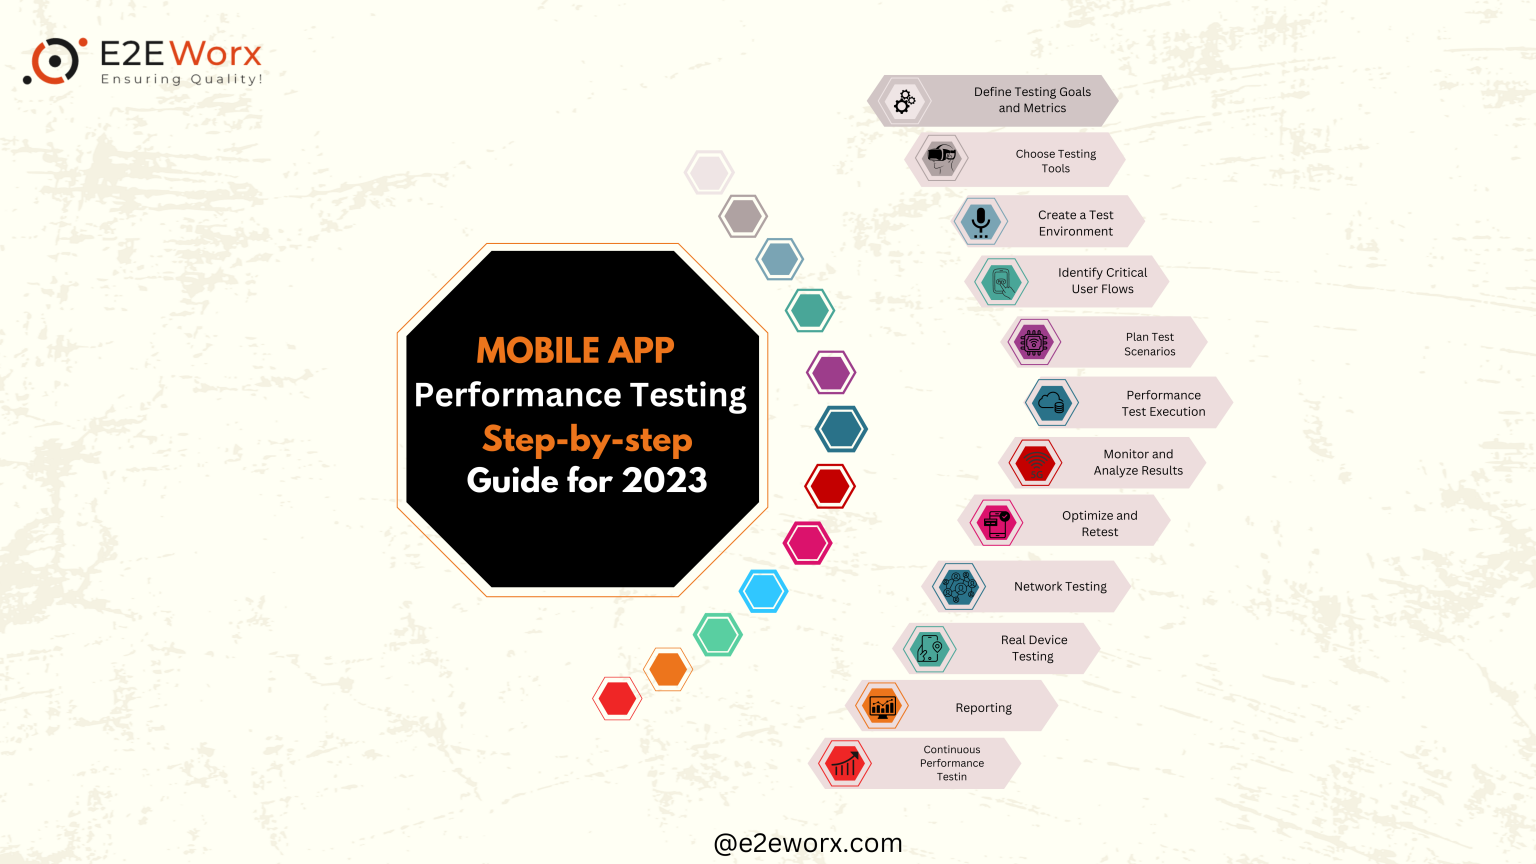 Mobile App Performance testing step by step guide for 2023 - E2EWorx Ensuring Quality